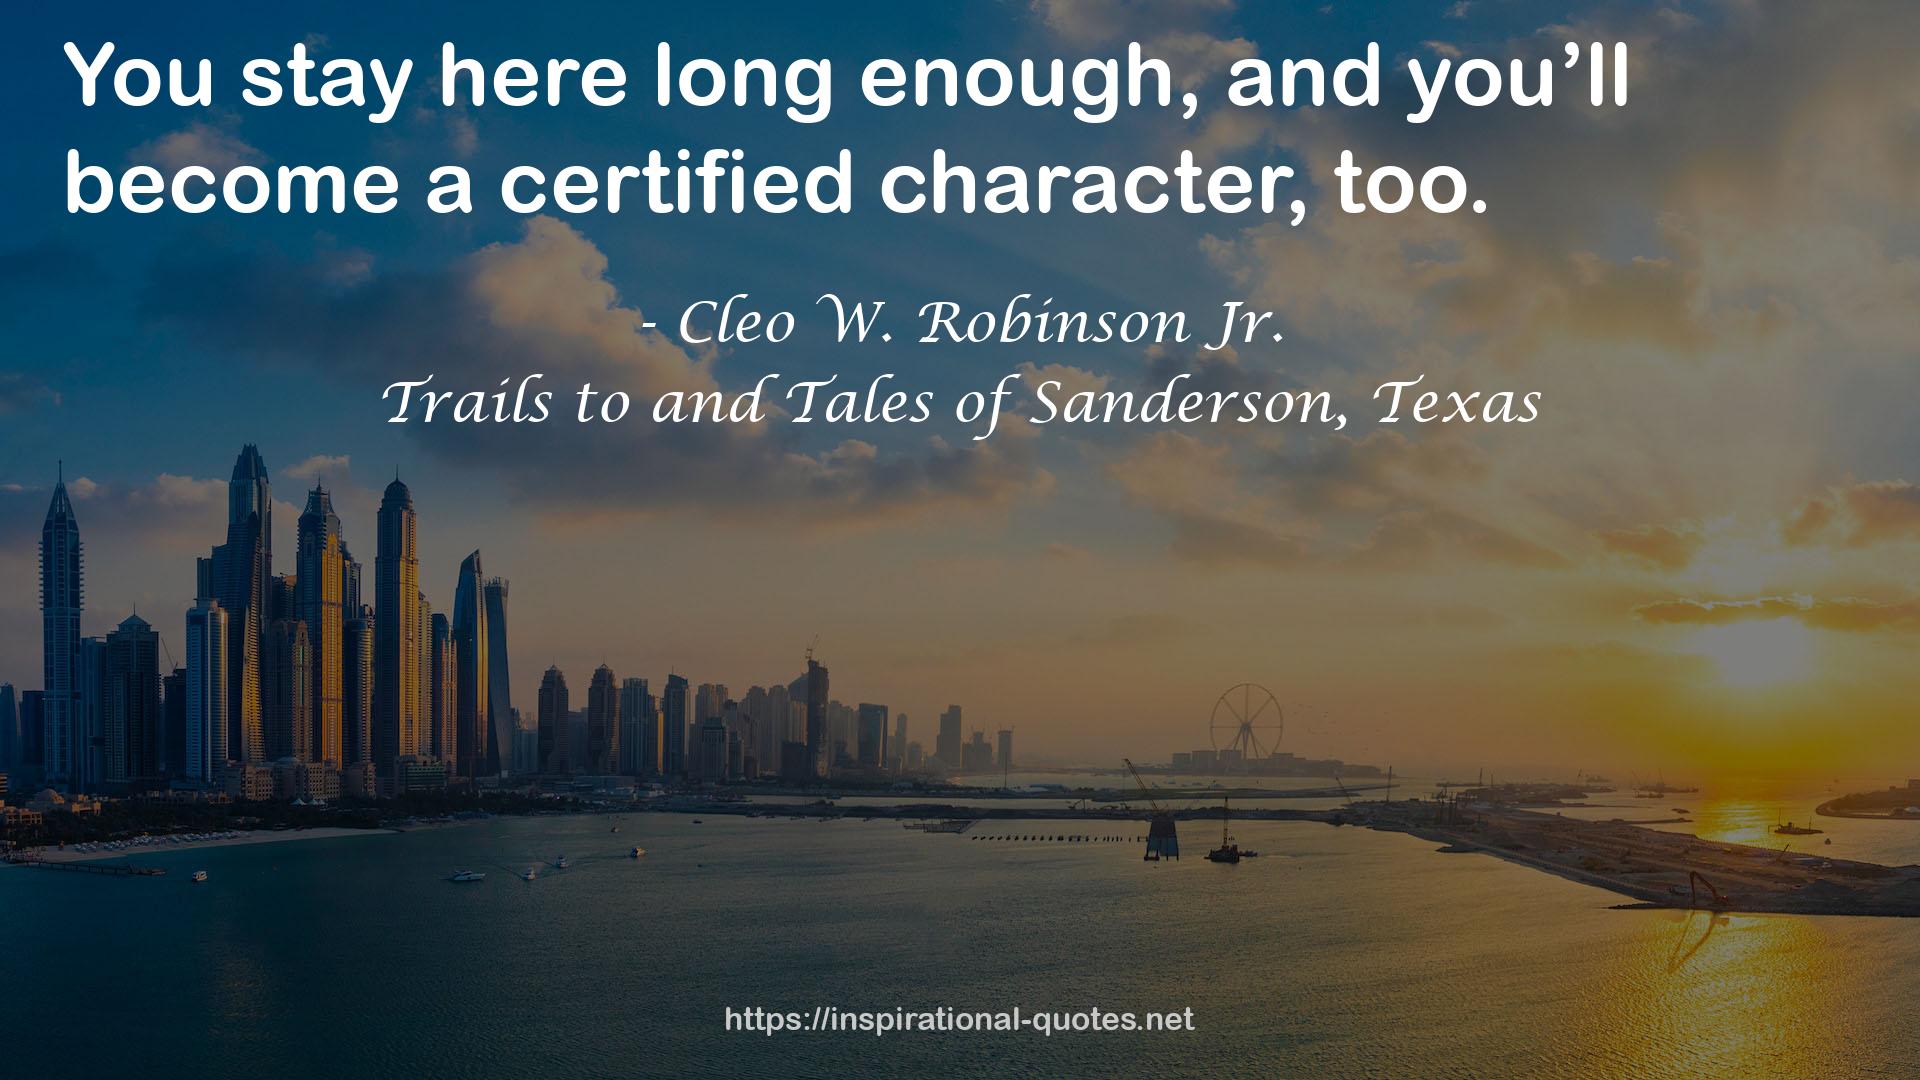 Trails to and Tales of Sanderson, Texas QUOTES